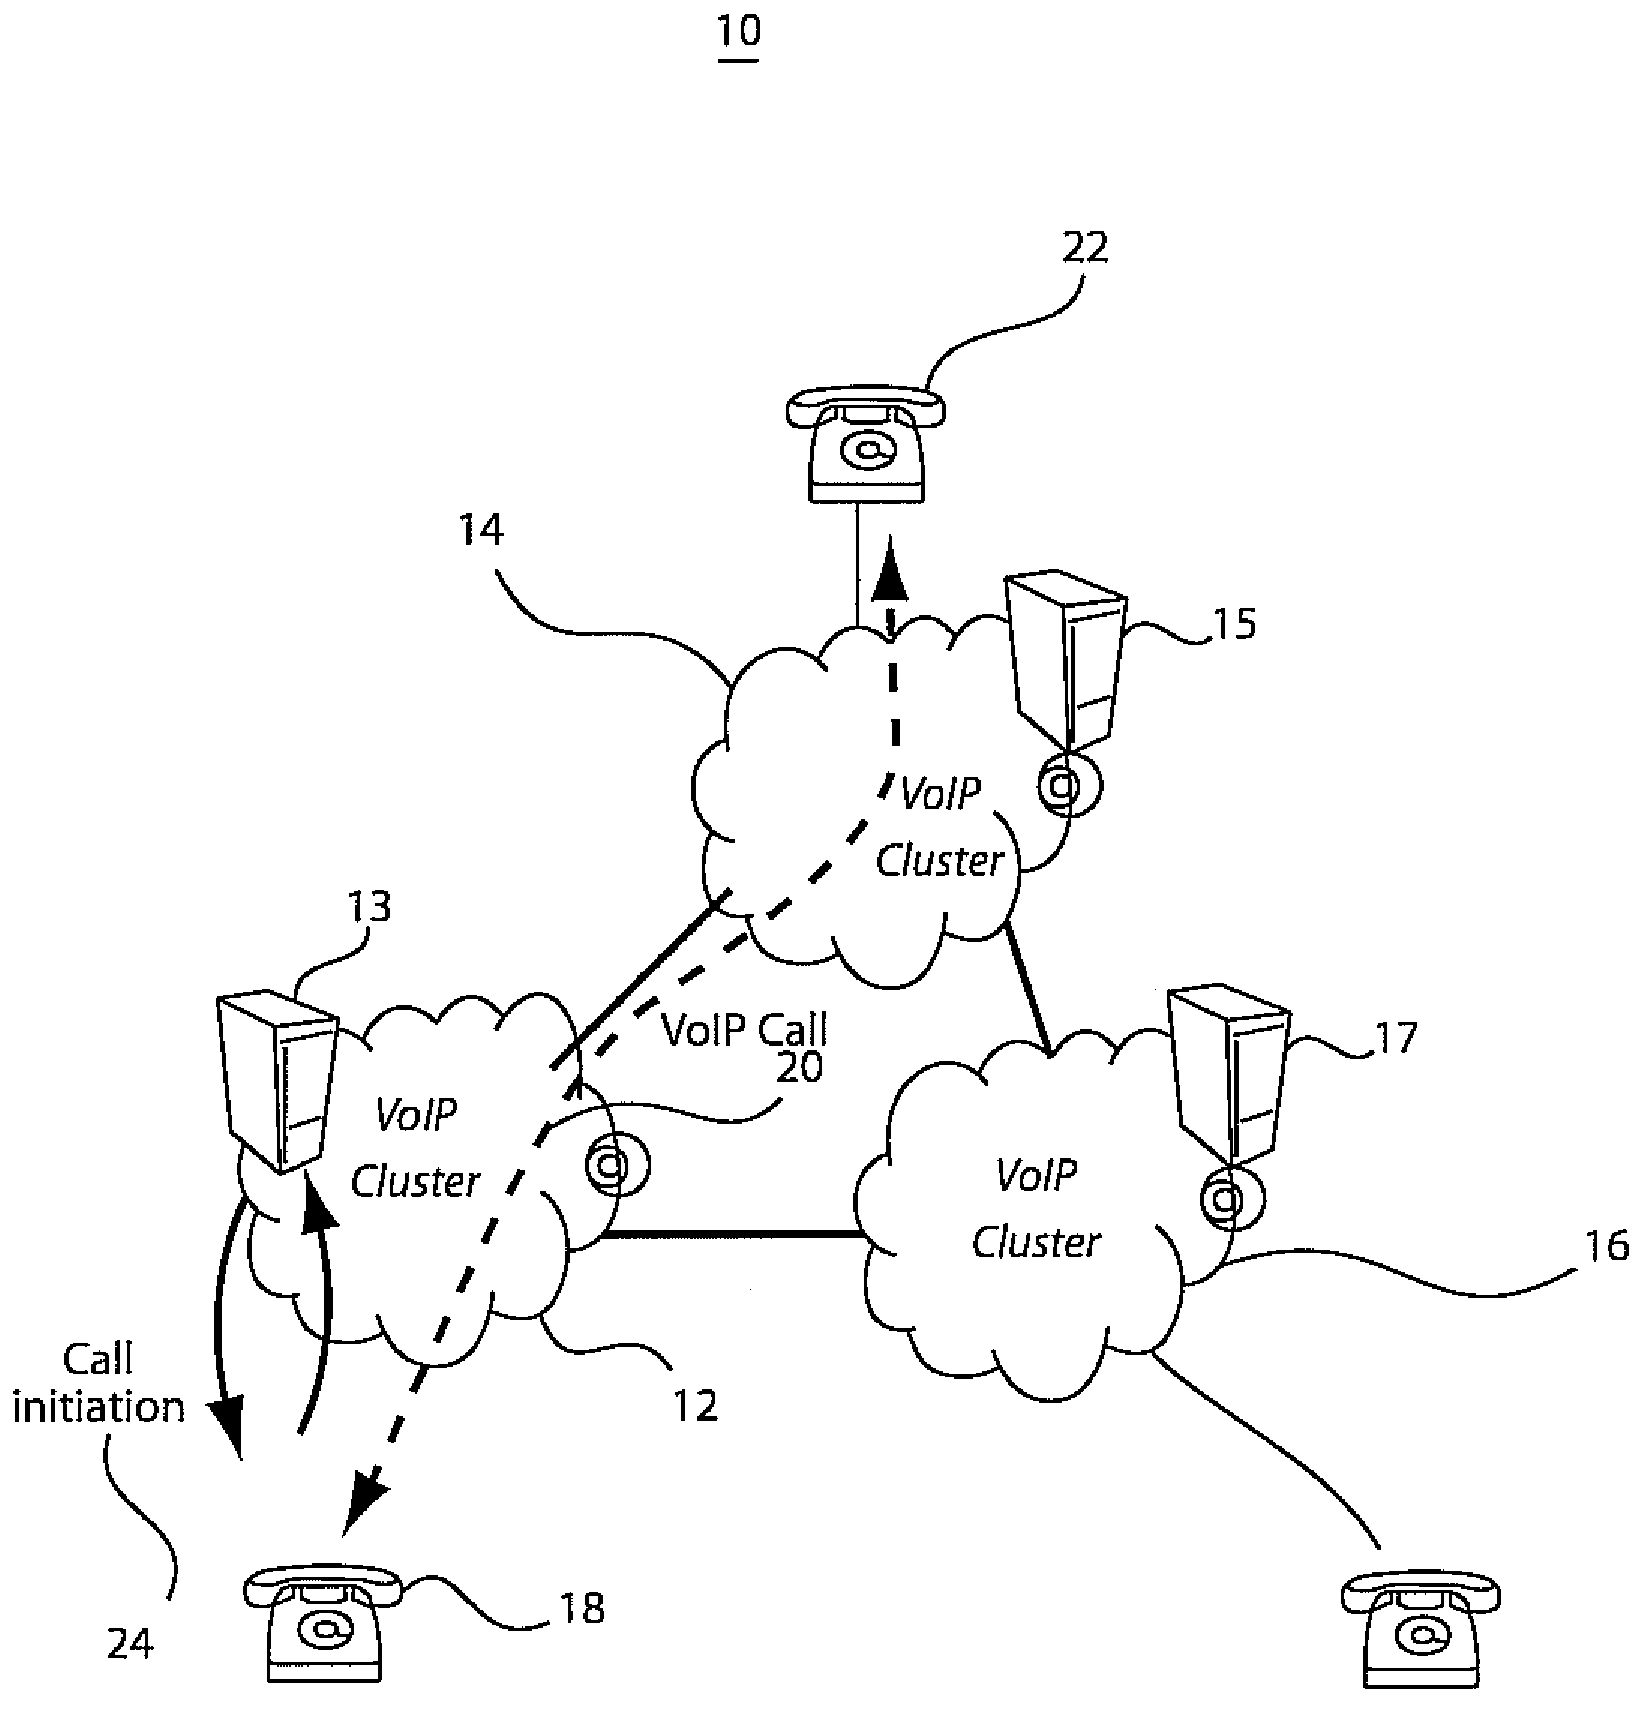 Method and system for platform-independent VOIP dial plan design, validation, and deployment